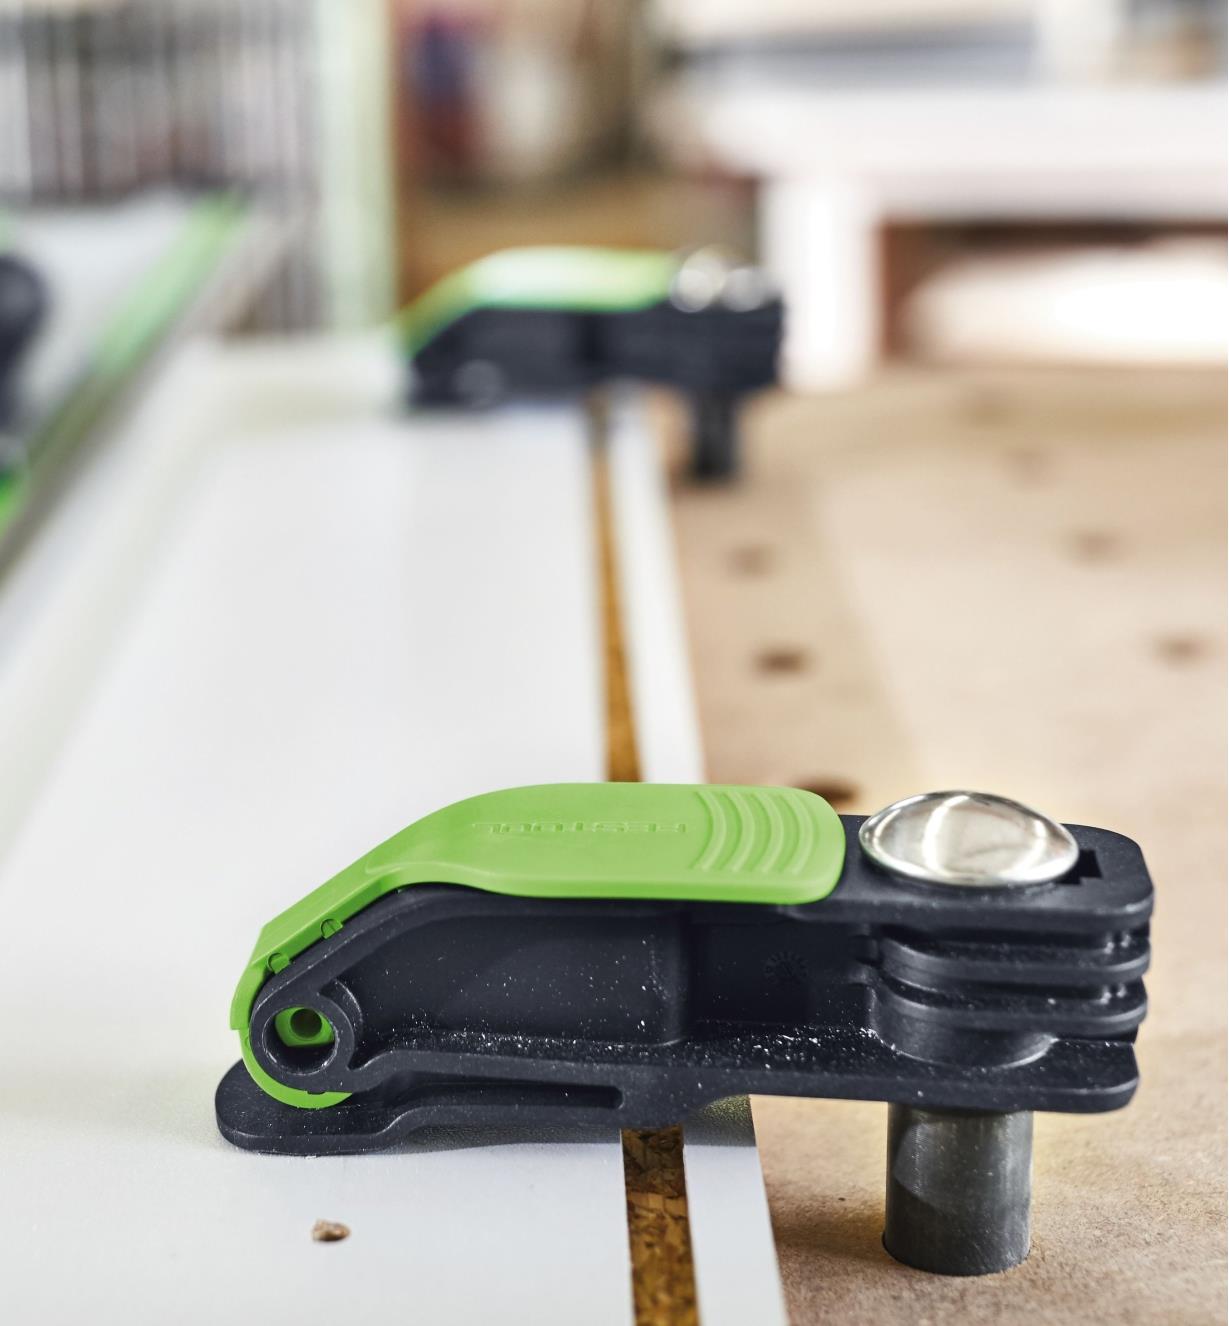 Two Festool Quick Clamps MFT-HZ 80 holding a board on an MFT table